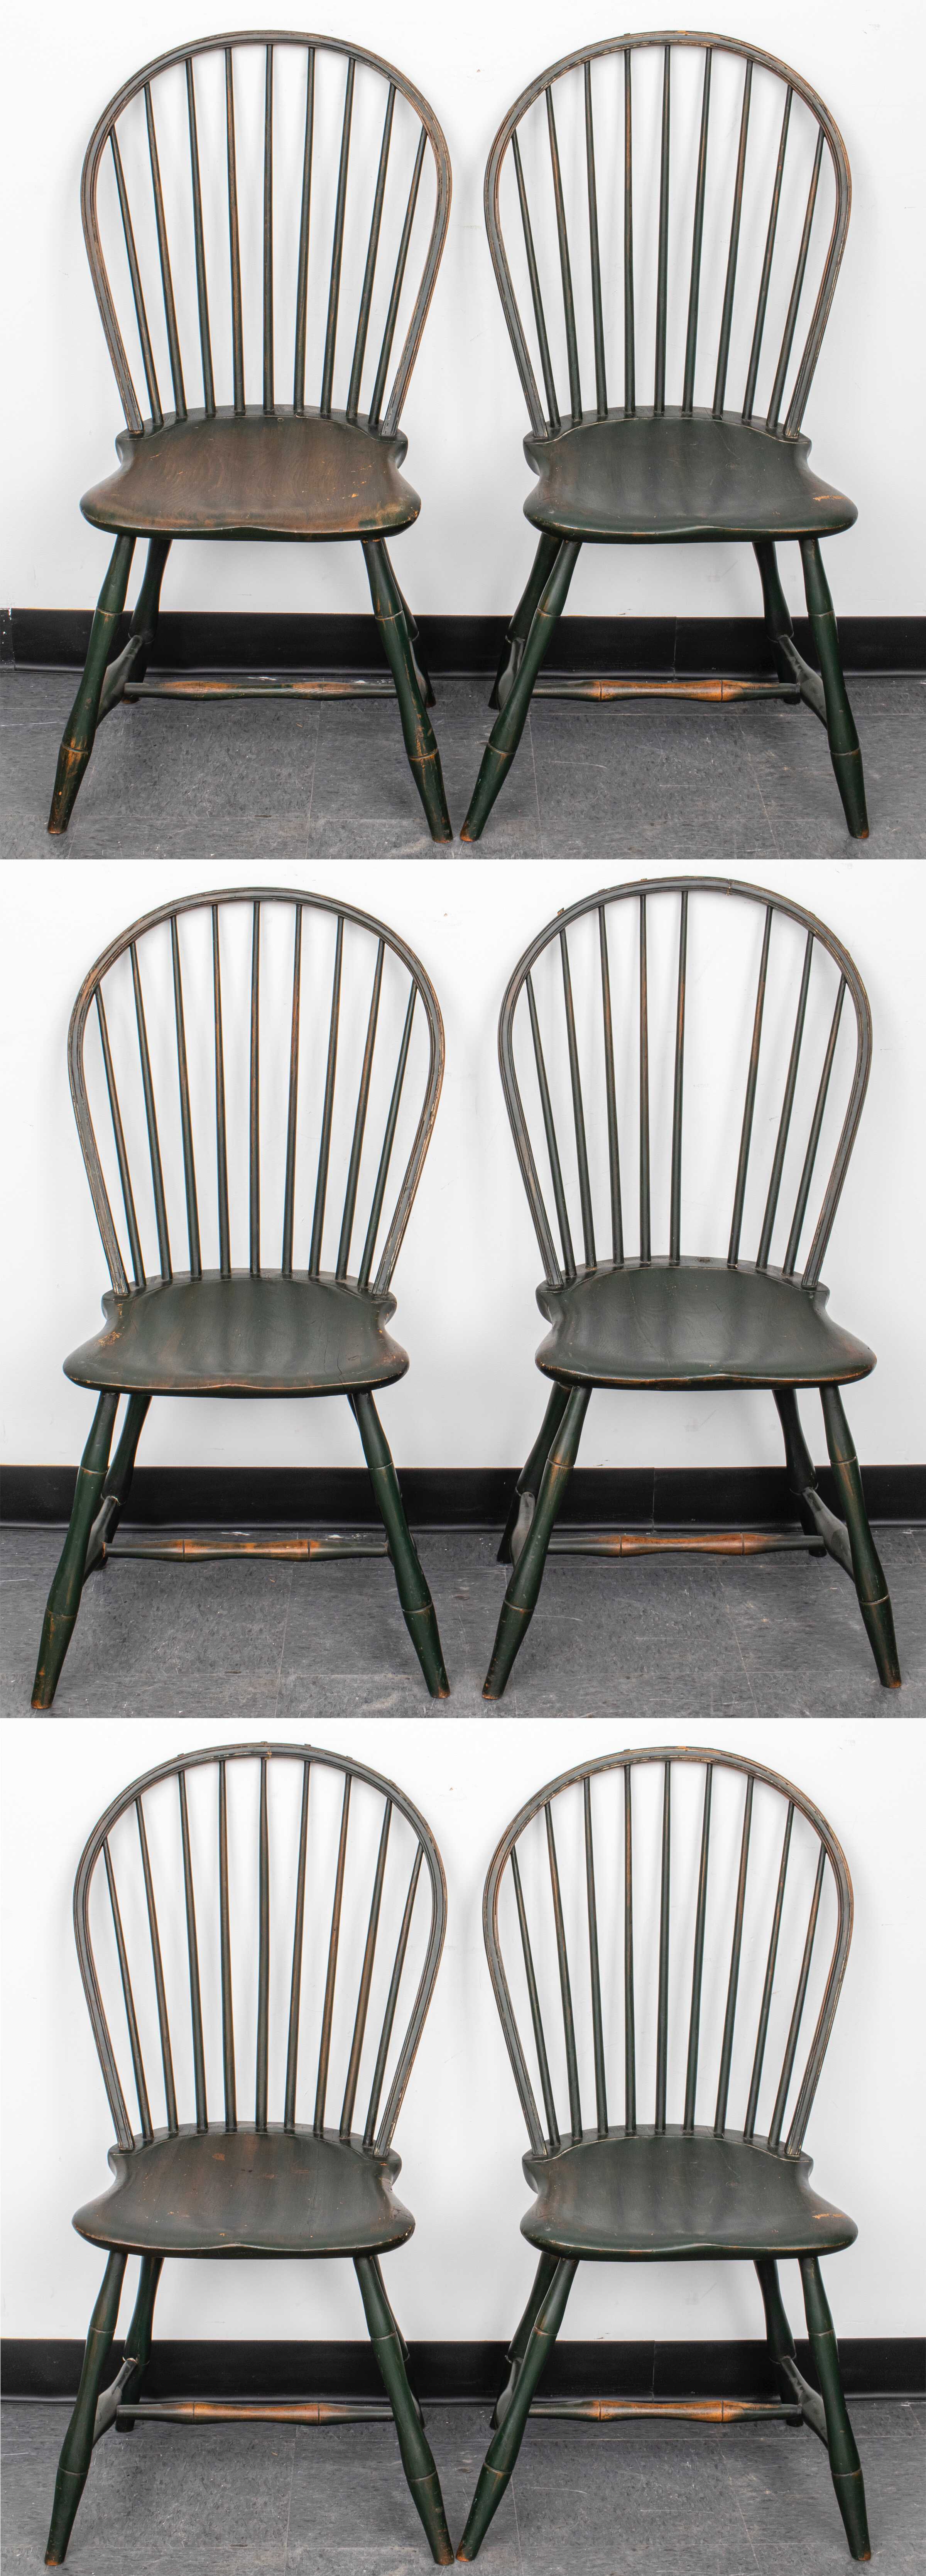 GREEN PAINTED WINDSOR CHAIRS, 6